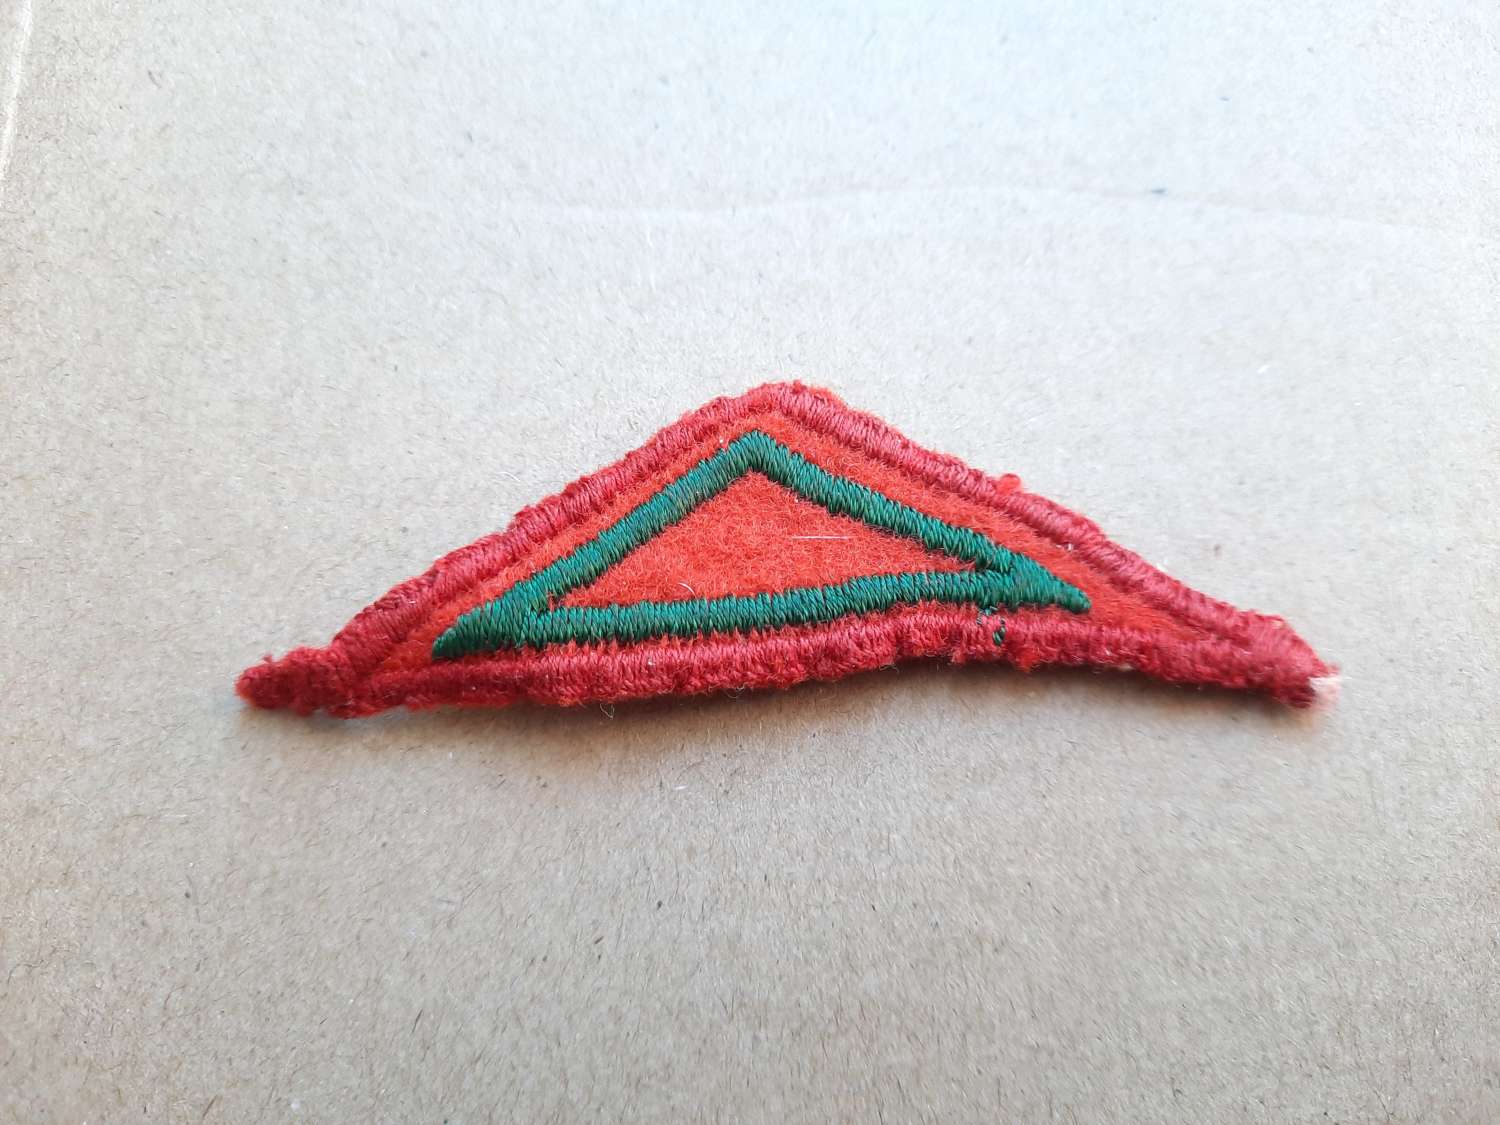 Women's Land Army 1/2 Year Service Triangle